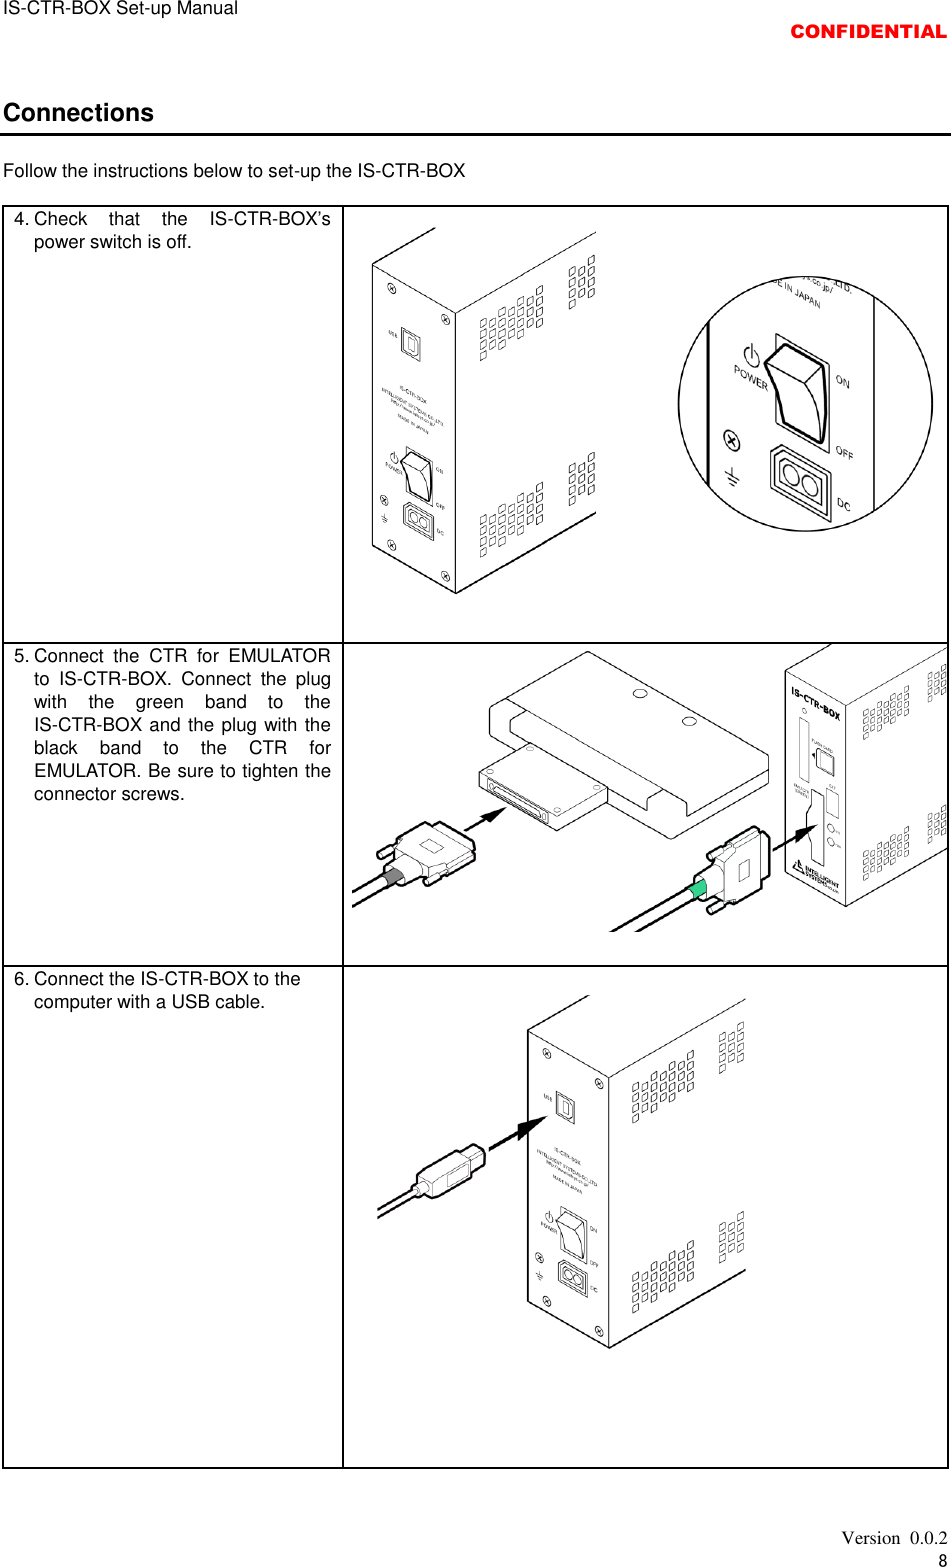 IS-CTR-BOX Set-up Manual  CONFIDENTIAL   Version  0.0.2 8  Connections  Follow the instructions below to set-up the IS-CTR-BOX  4. Check  that  the  IS-CTR-BOX’s power switch is off.  5. Connect  the  CTR  for  EMULATOR to  IS-CTR-BOX.  Connect  the  plug with  the  green  band  to  the IS-CTR-BOX and the plug with the black  band  to  the  CTR  for EMULATOR. Be sure to tighten the connector screws.  6. Connect the IS-CTR-BOX to the computer with a USB cable.   